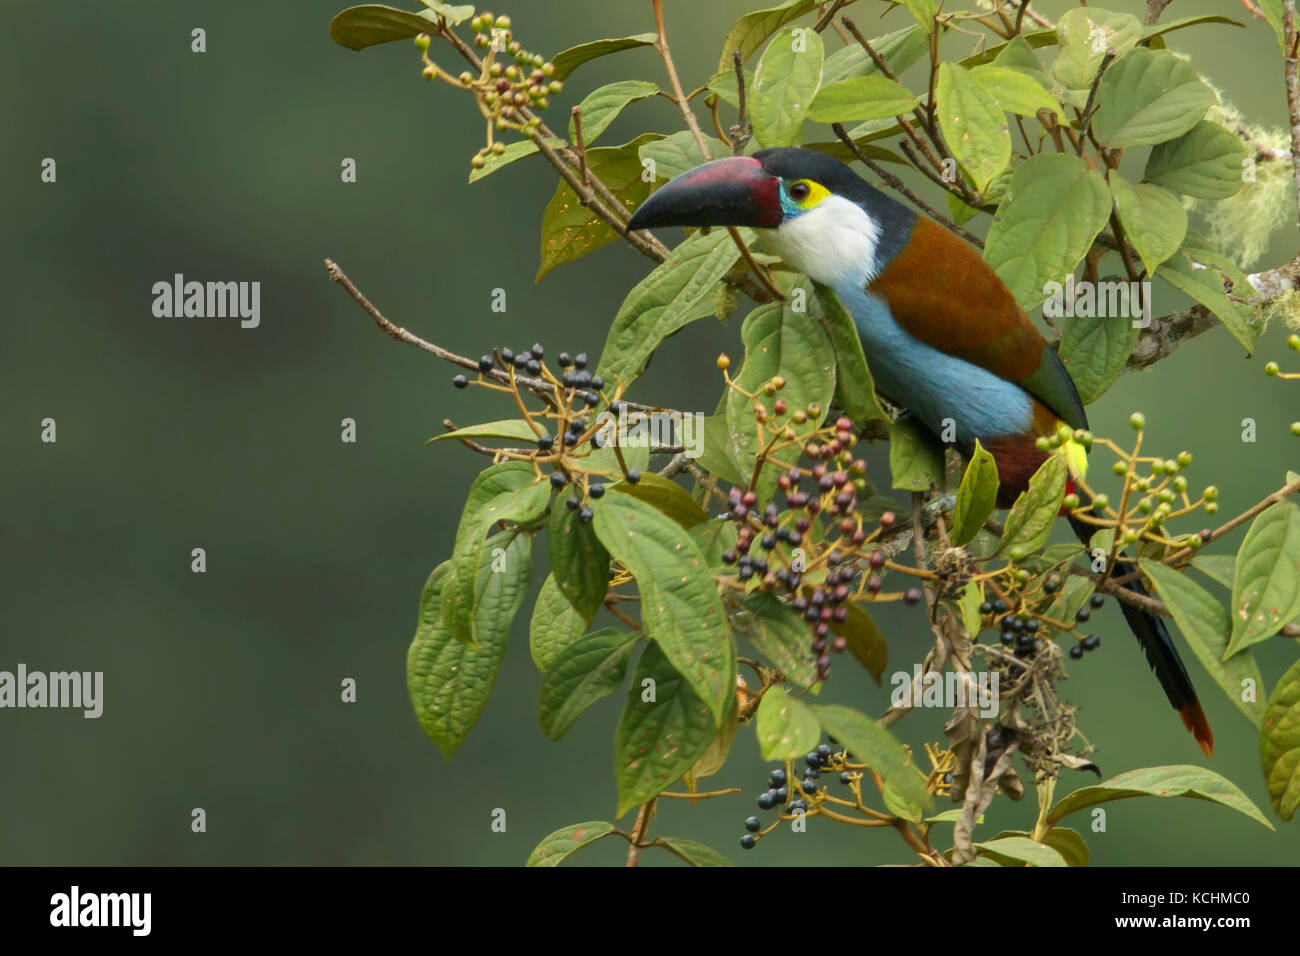 Black-billed Mountain Toucan (Andigena nigrirostris) perched on a branch in the mountains of Colombia, South America. Stock Photo